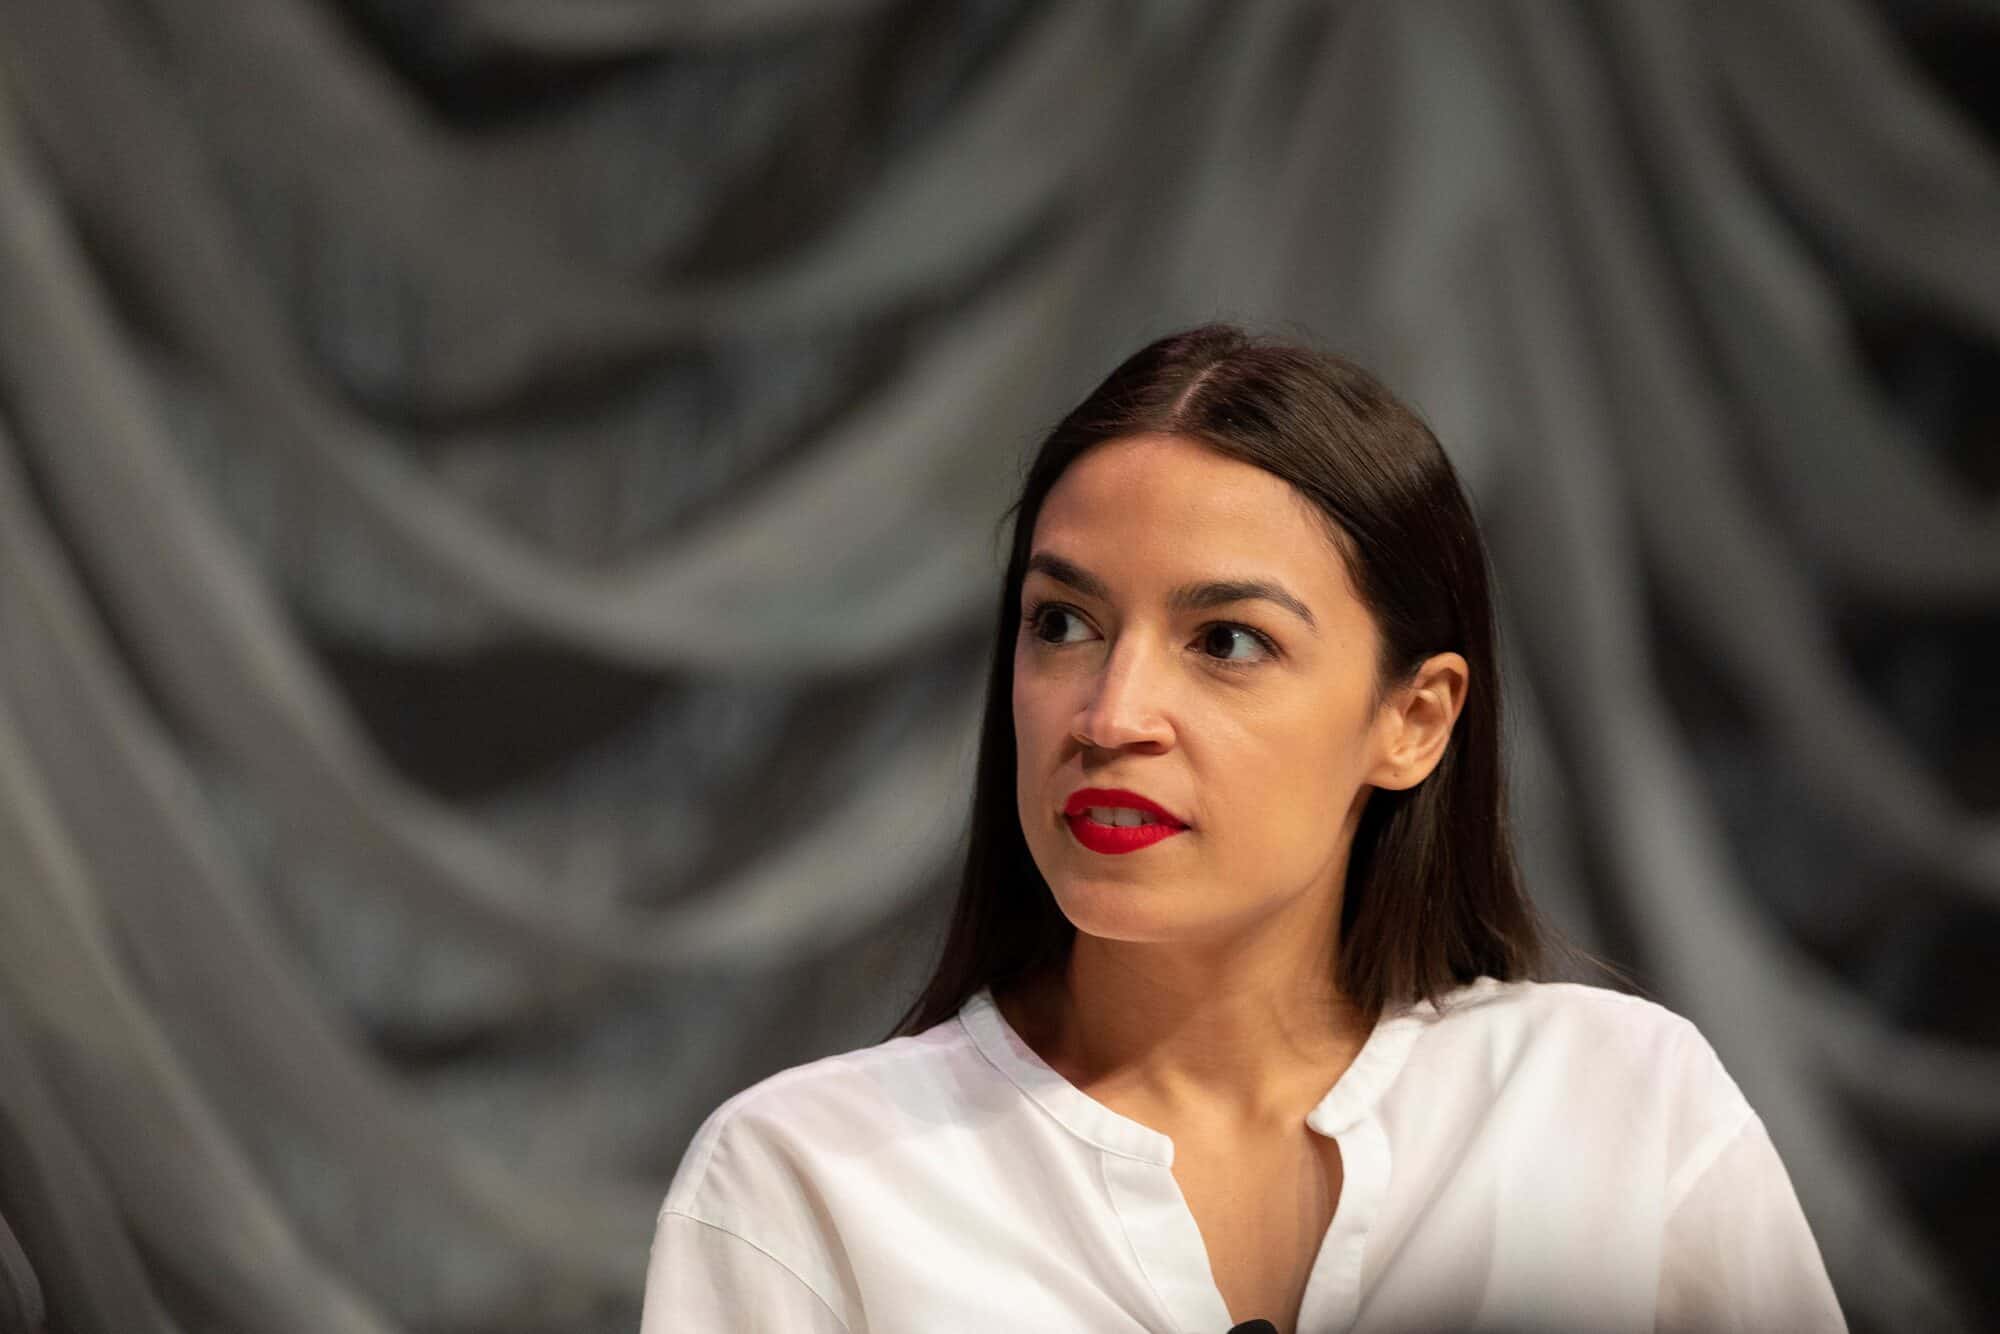 Reflecting on Ocasio-Cortez and a bold opportunity for democratic socialist organizing in Canada